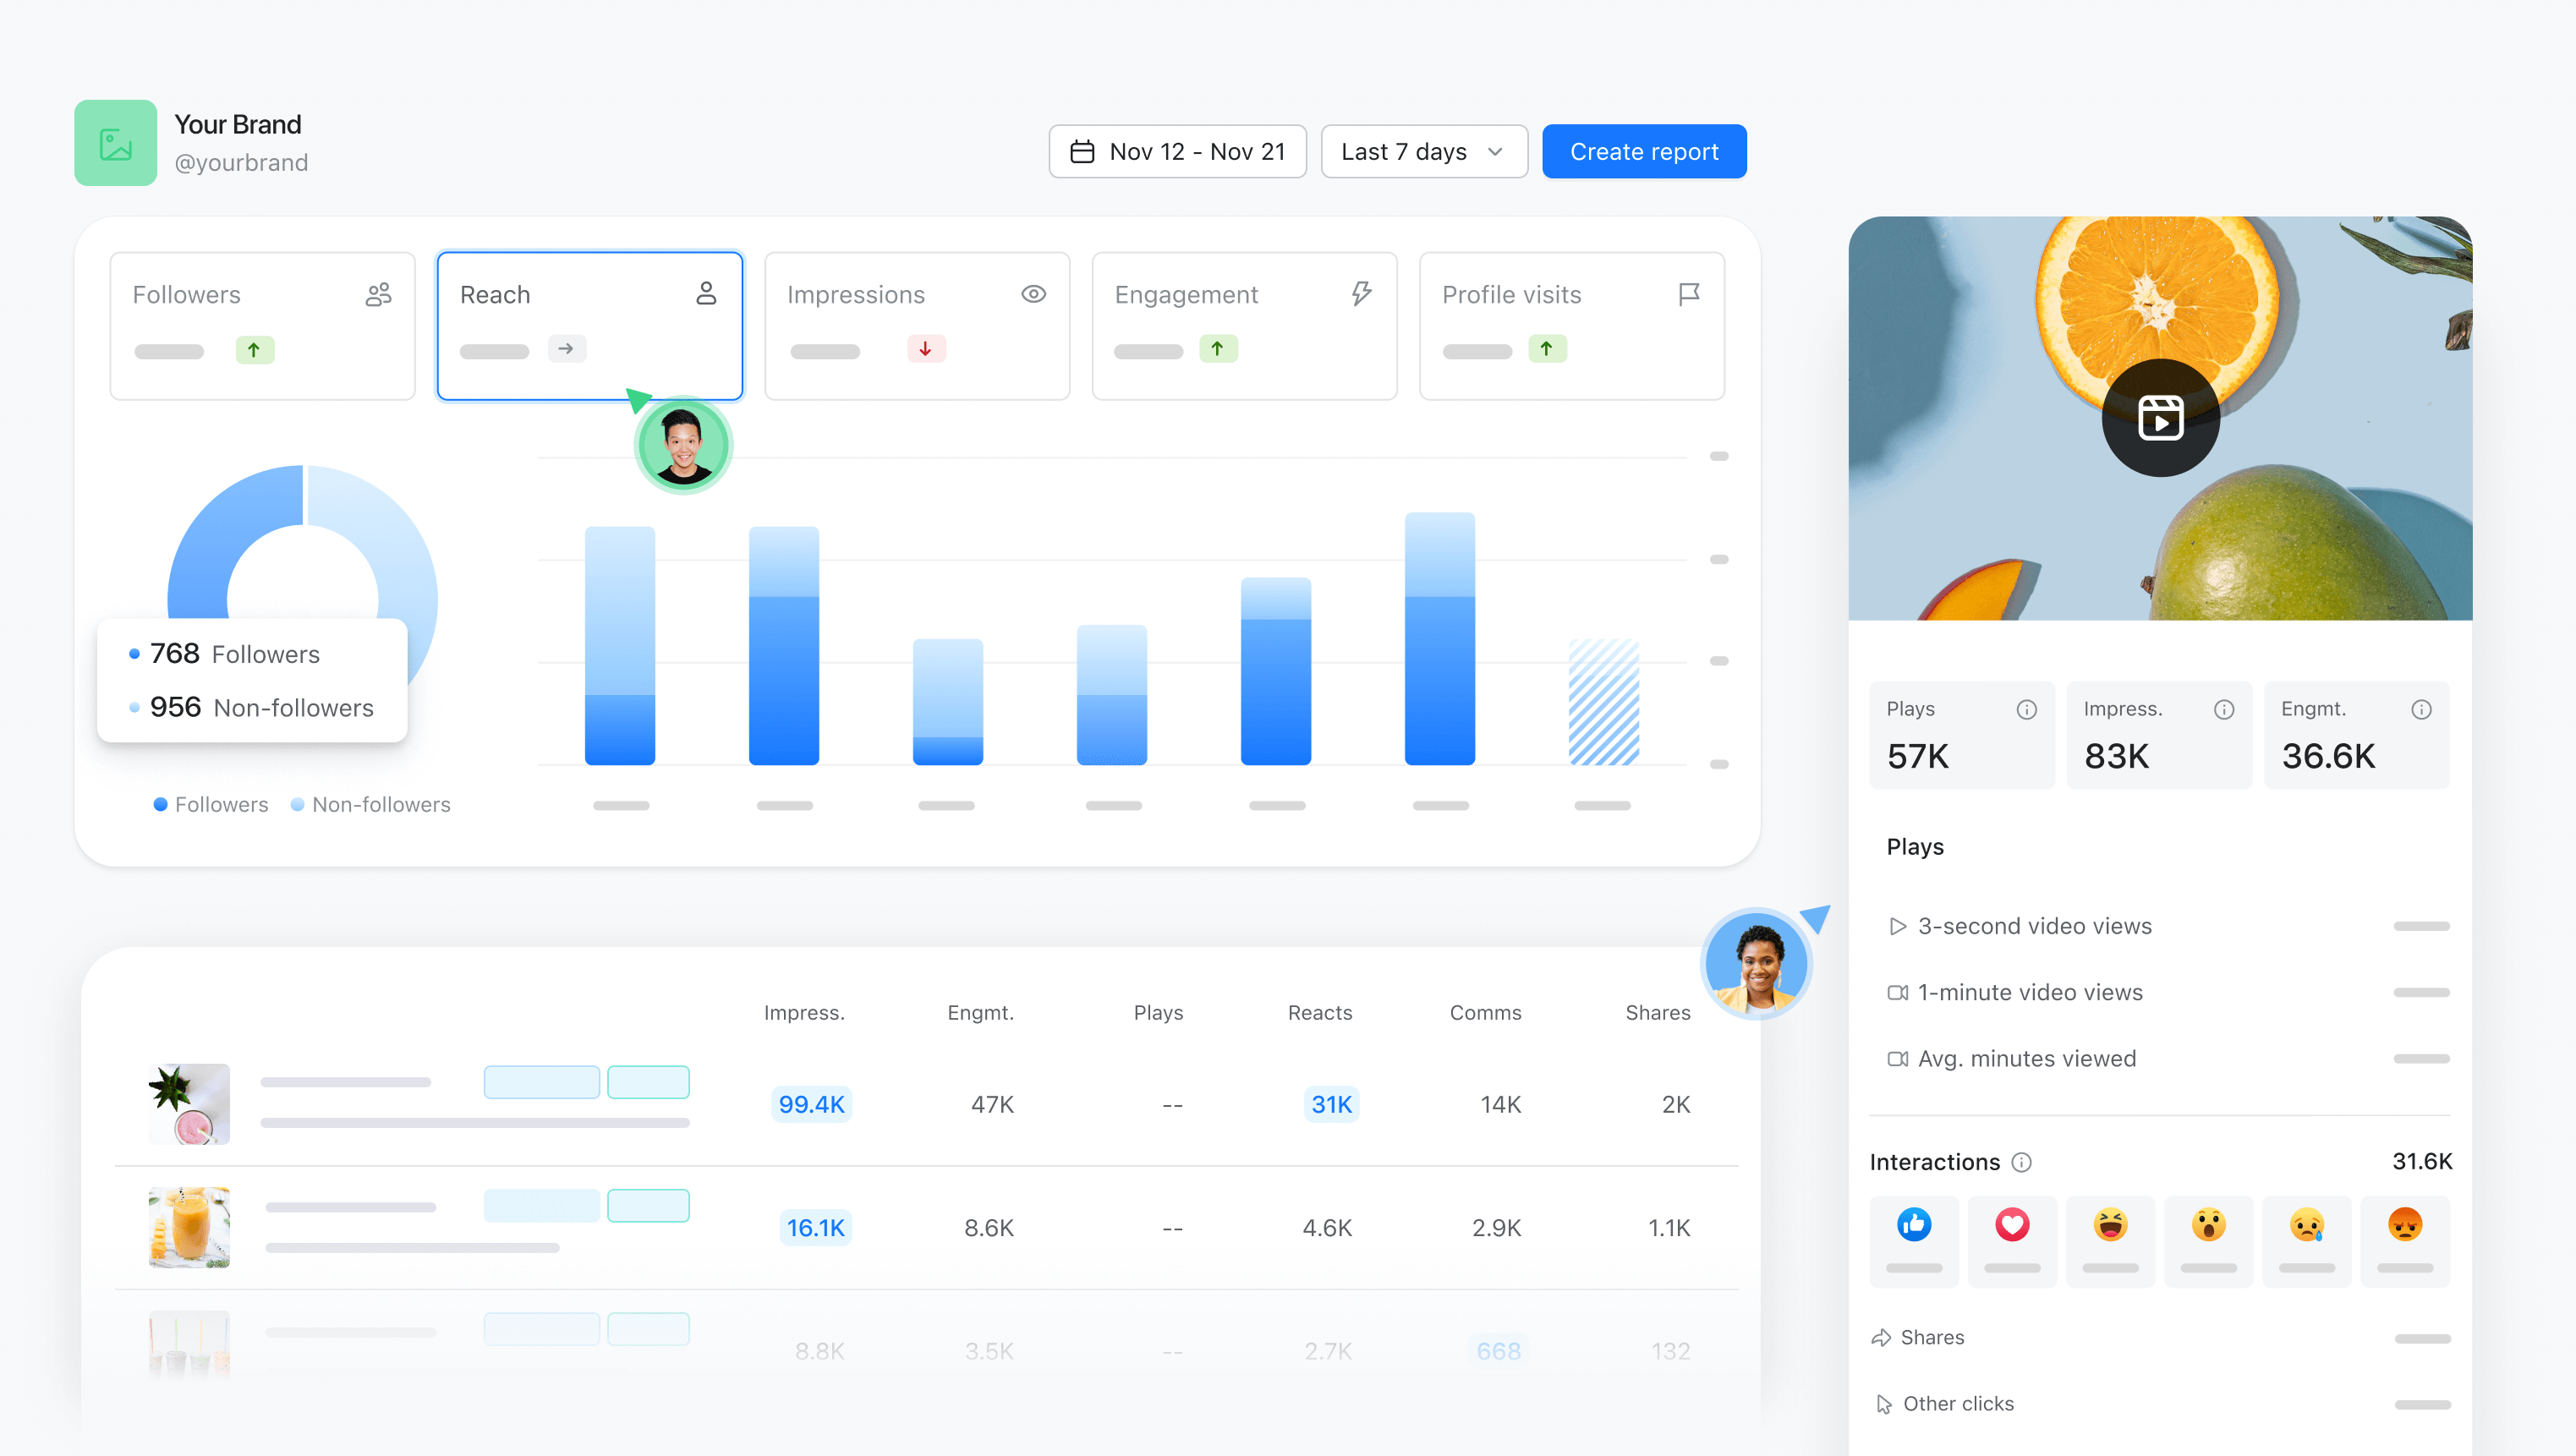 Social media analytics dashboard for "Your Brand" showing metrics for followers, reach, impressions, engagement, and profile visits, with detailed statistics on video plays and interactions.